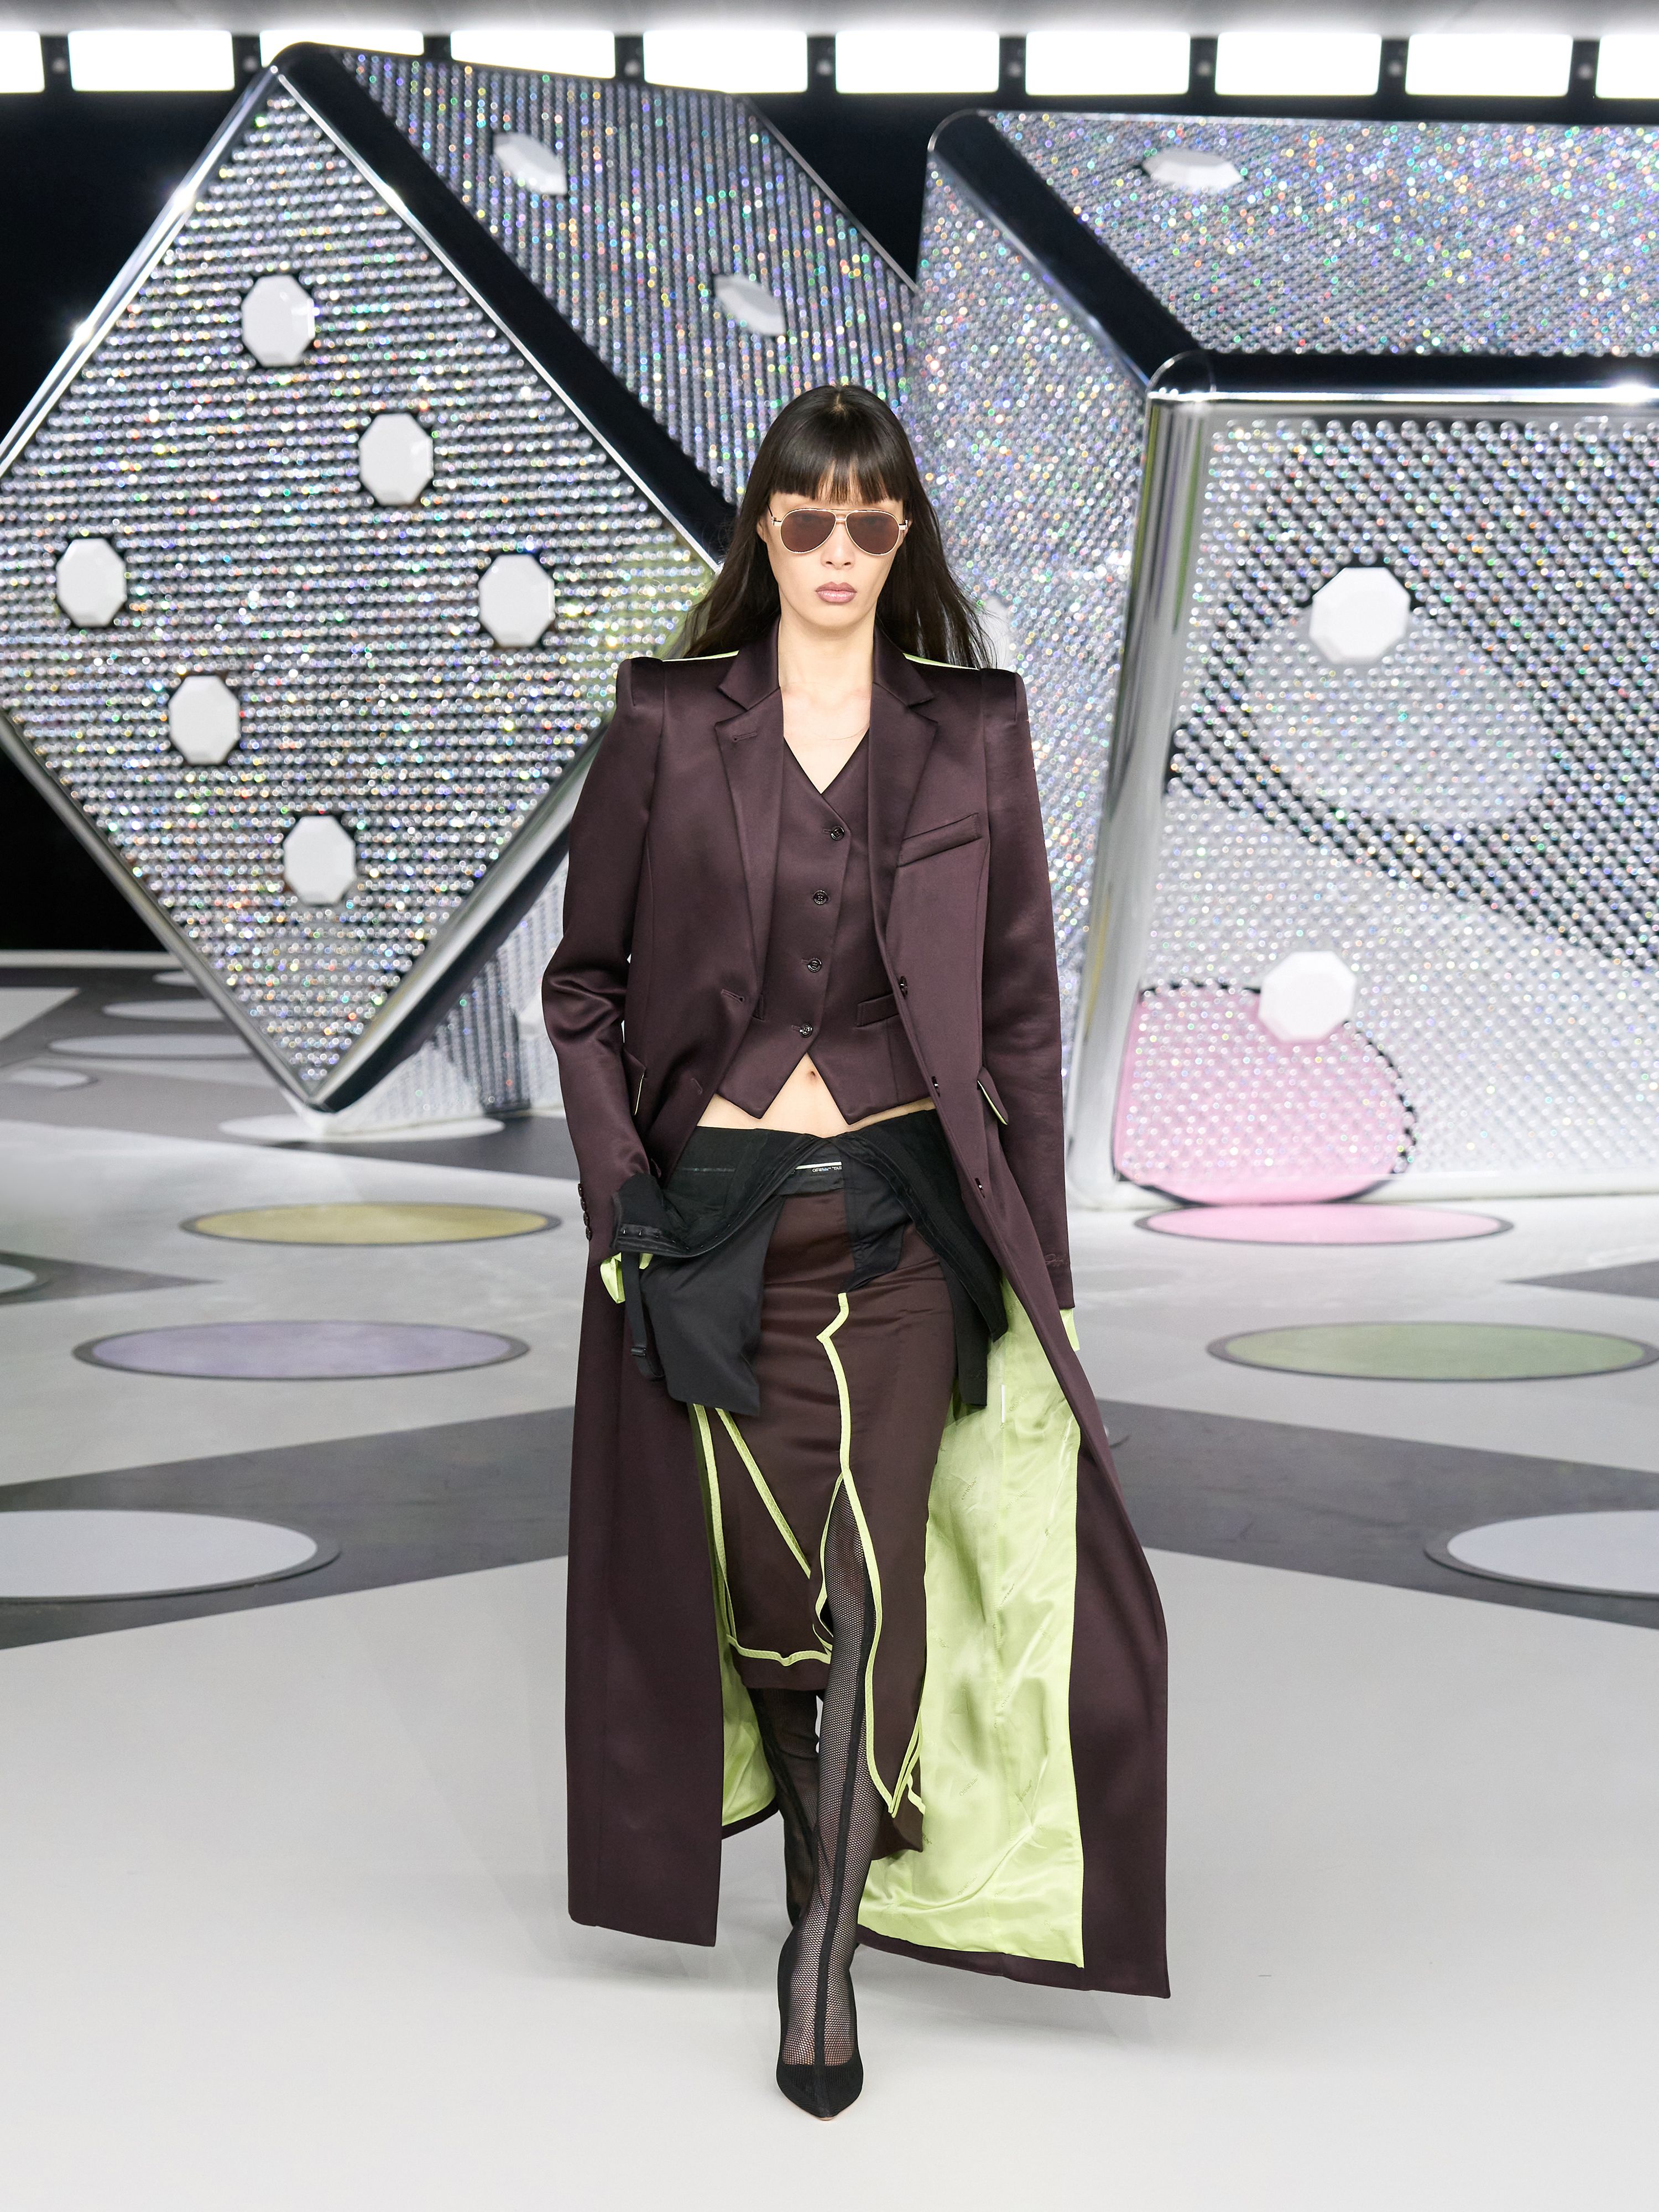 His working woman, global and ageless, came with faux fur, maximalism, in playful, hybrid cuts.